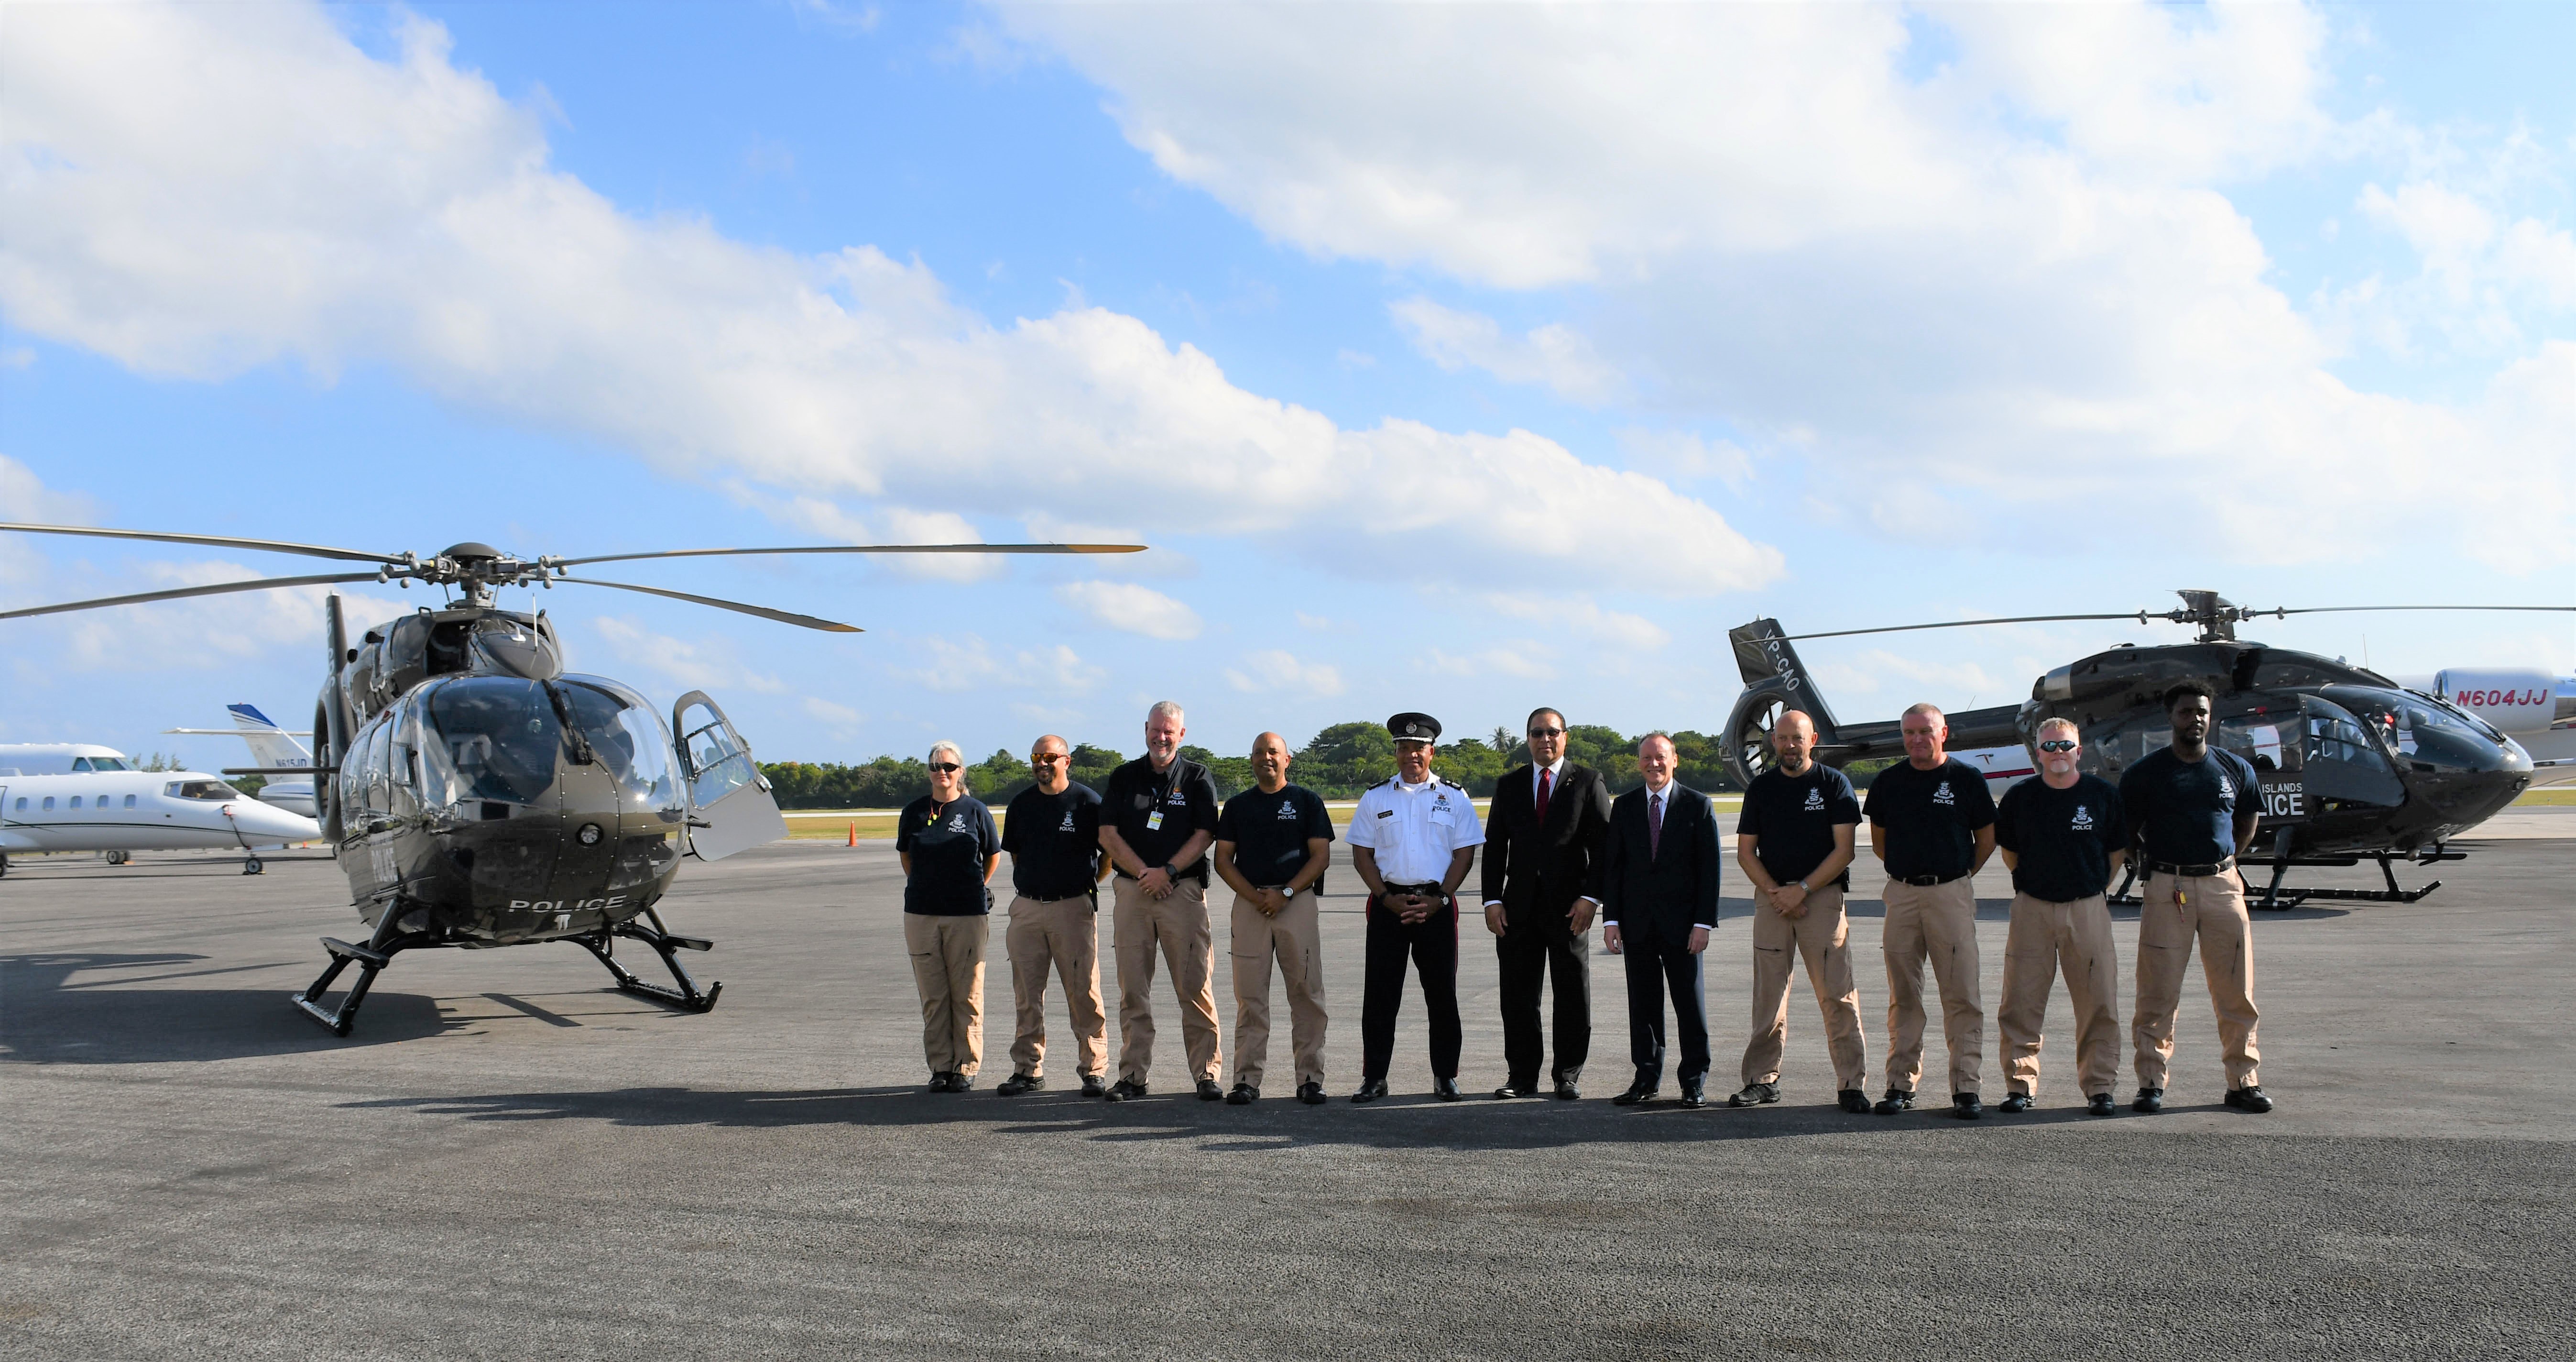 6. Governor, Premier and RCIPS Air Operations Unit with both helicopters